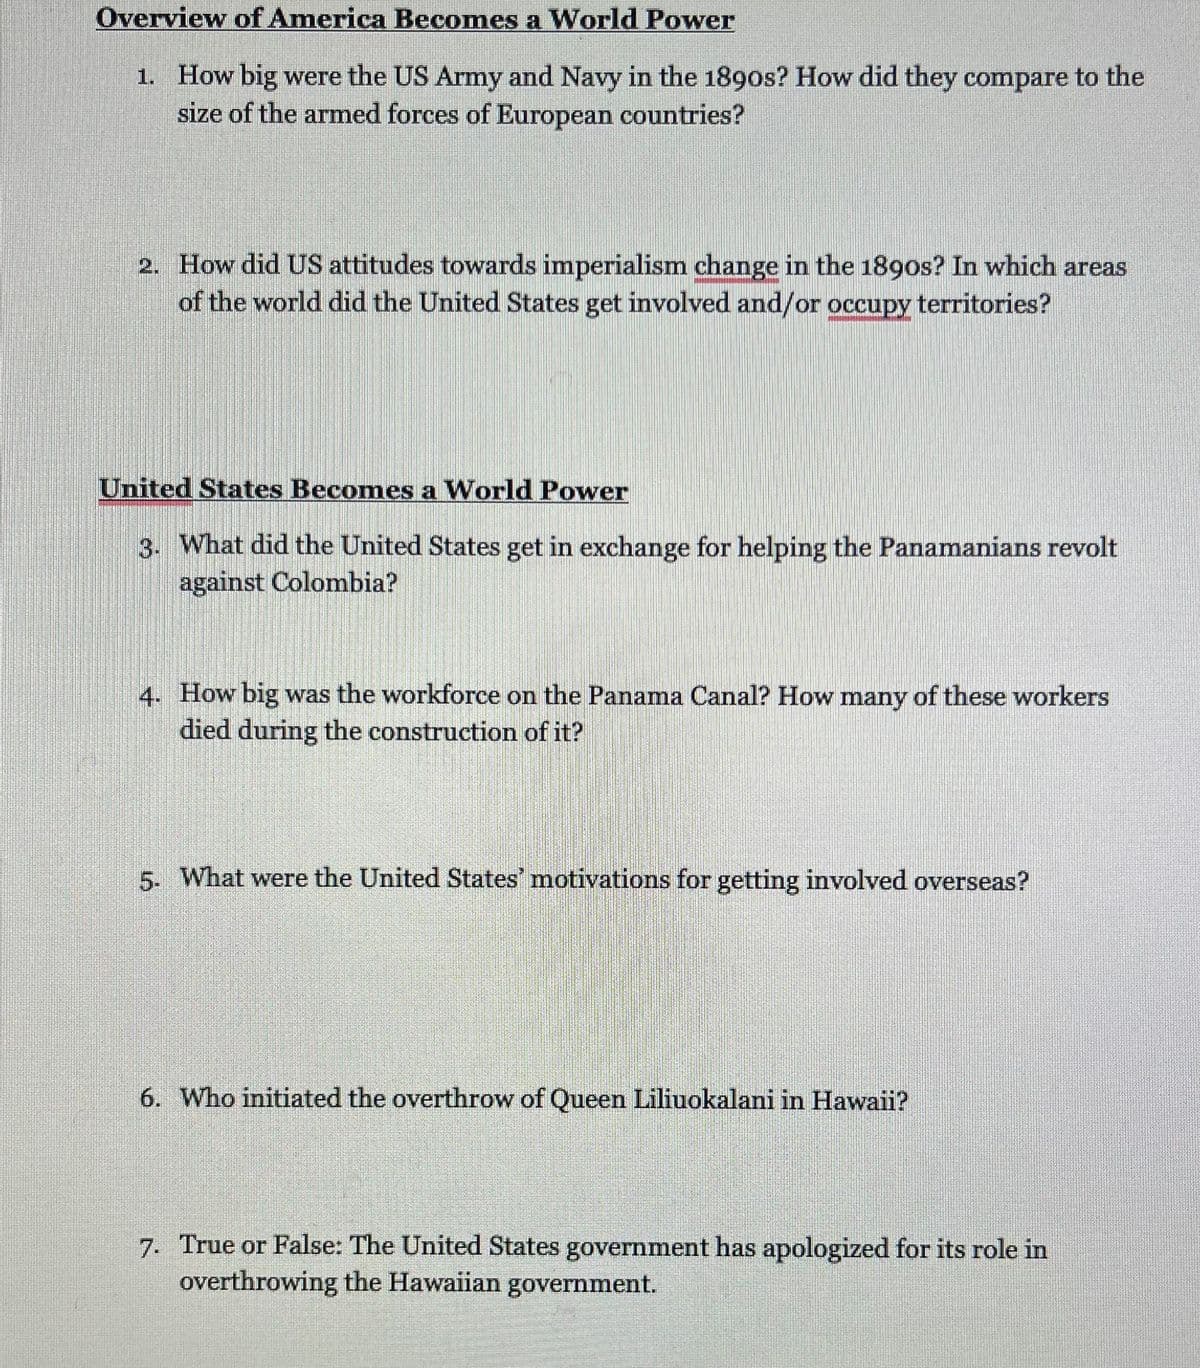 Overview of America Becomes a World Power
1. How big were the US Army and Navy in the 1890s? How did they compare to the
size of the armed forces of European countries?
2. How did US attitudes towards imperialism change in the 1890s? In which areas
of the world did the United States get involved and/or occupy territories?
United States Becomes a World Power
3. What did the United States get in exchange for helping the Panamanians revolt
against Colombia?
4. How big was the workforce on the Panama Canal? How many of these workers
died during the construction of it?
5. What were the United States' motivations for getting involved overseas?
6. Who initiated the overthrow of Queen Liliuokalani in Hawaii?
7. True or False: The United States government has apologized for its role in
overthrowing the Hawaiian government.
